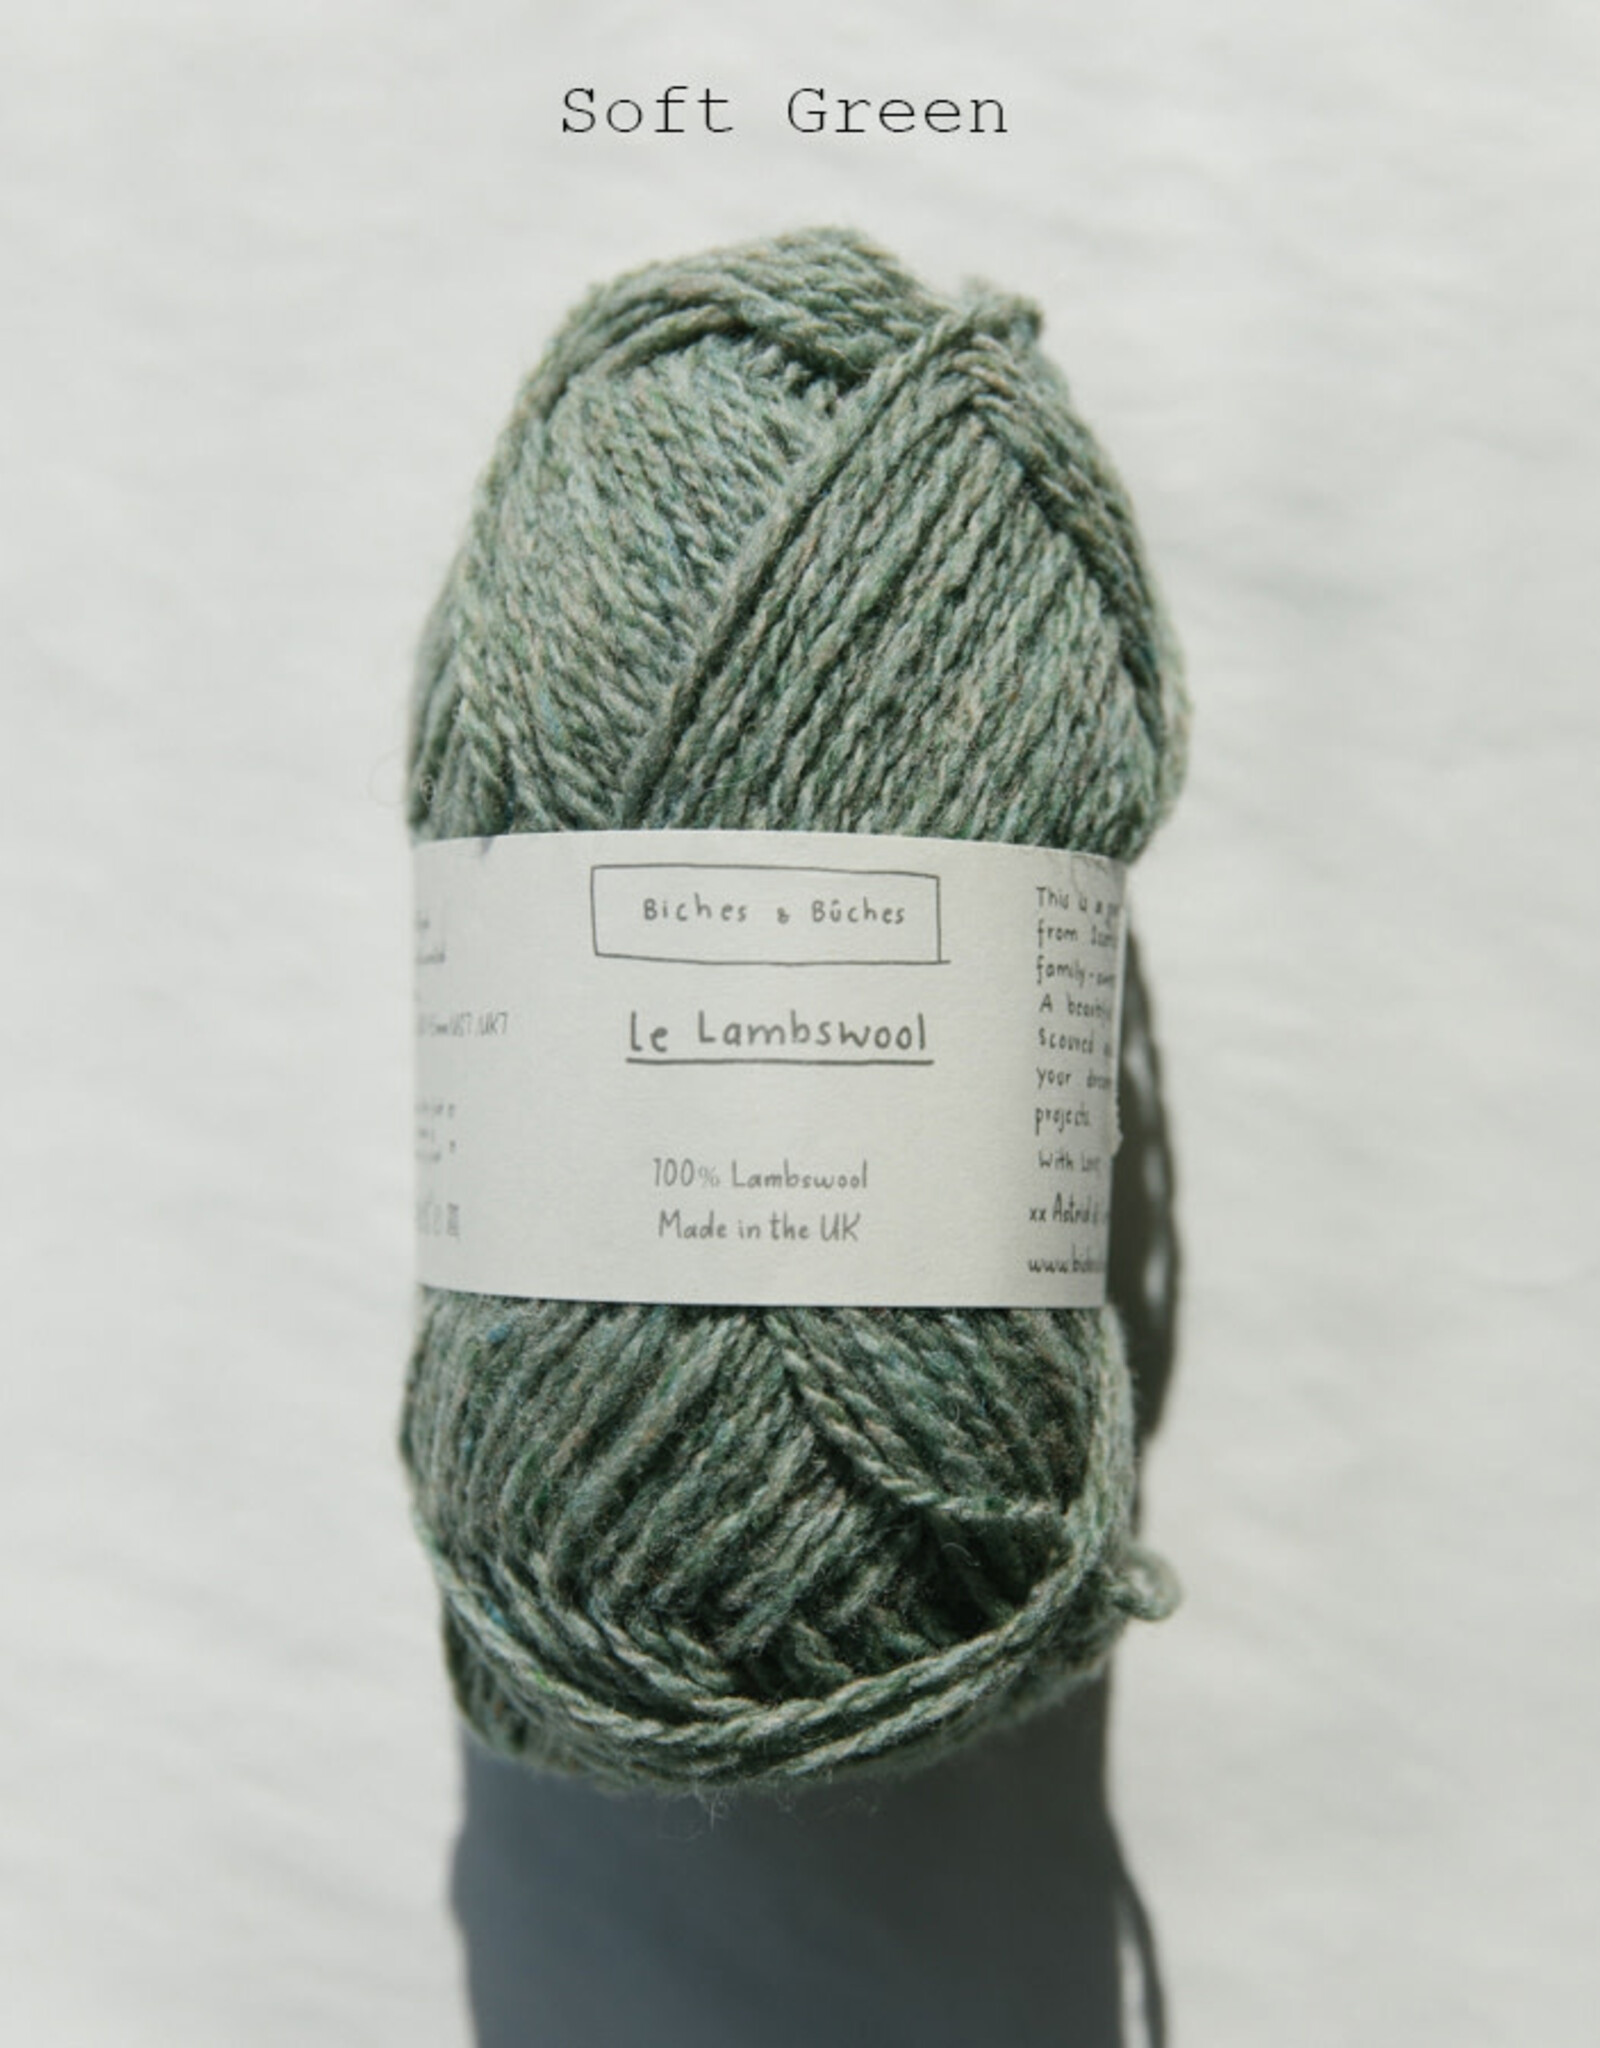 Biches et Buches Le Lambswool Soft Green